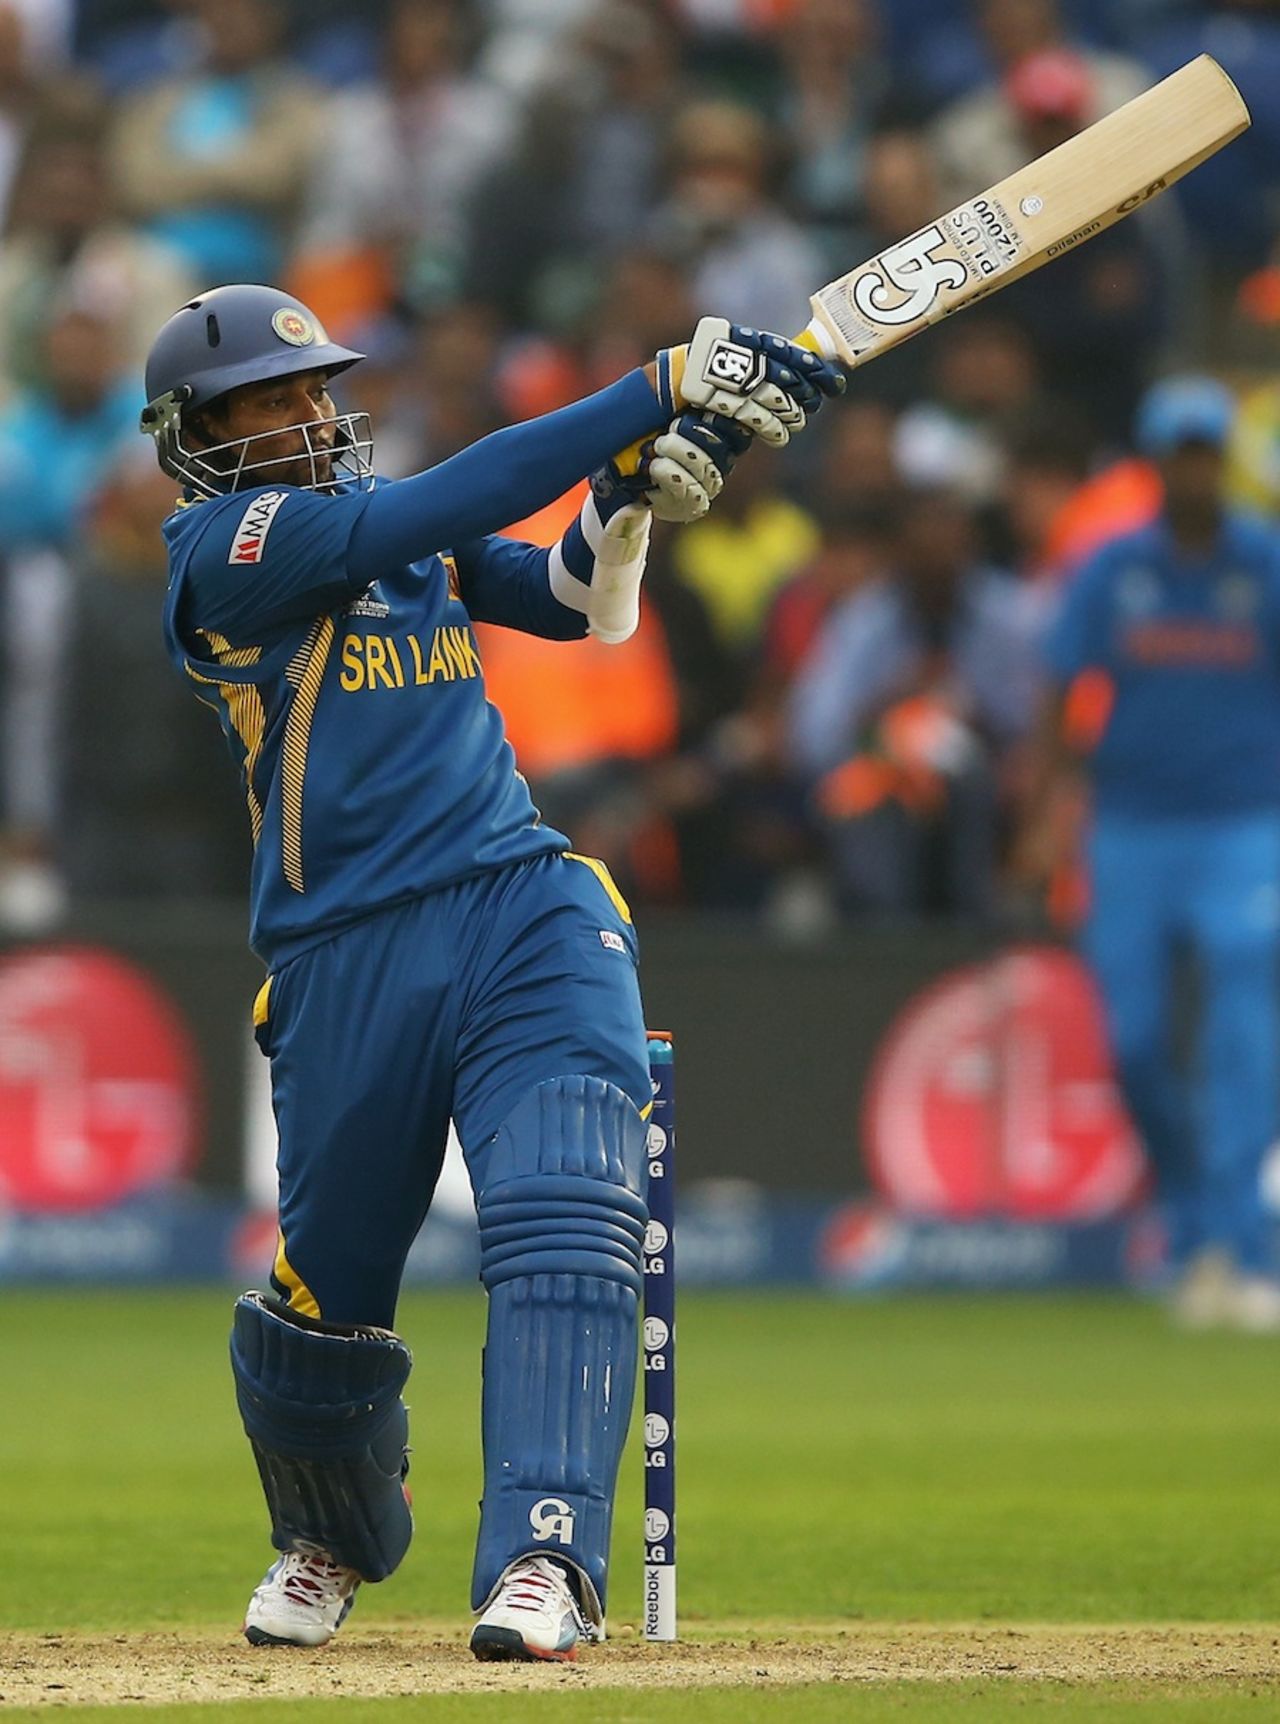 Tillakaratne Dilshan came back to bat towards the end of the innings, India v Sri Lanka, Champions Trophy, 2nd semi-final, Cardiff, June 20, 2013